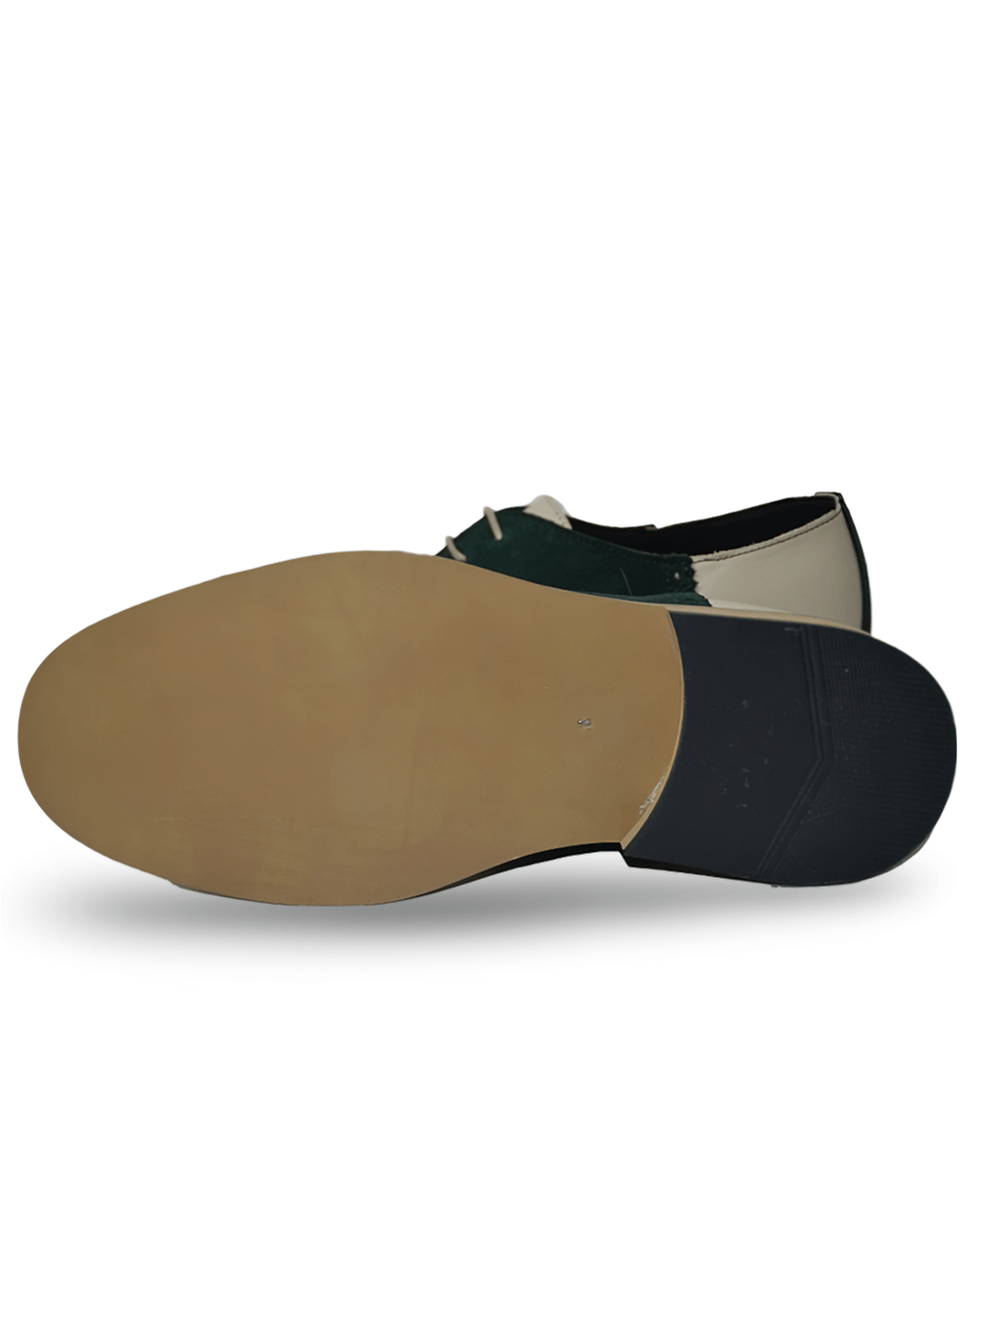 Unisex Beige and Green Leather Suede Bowling Shoes